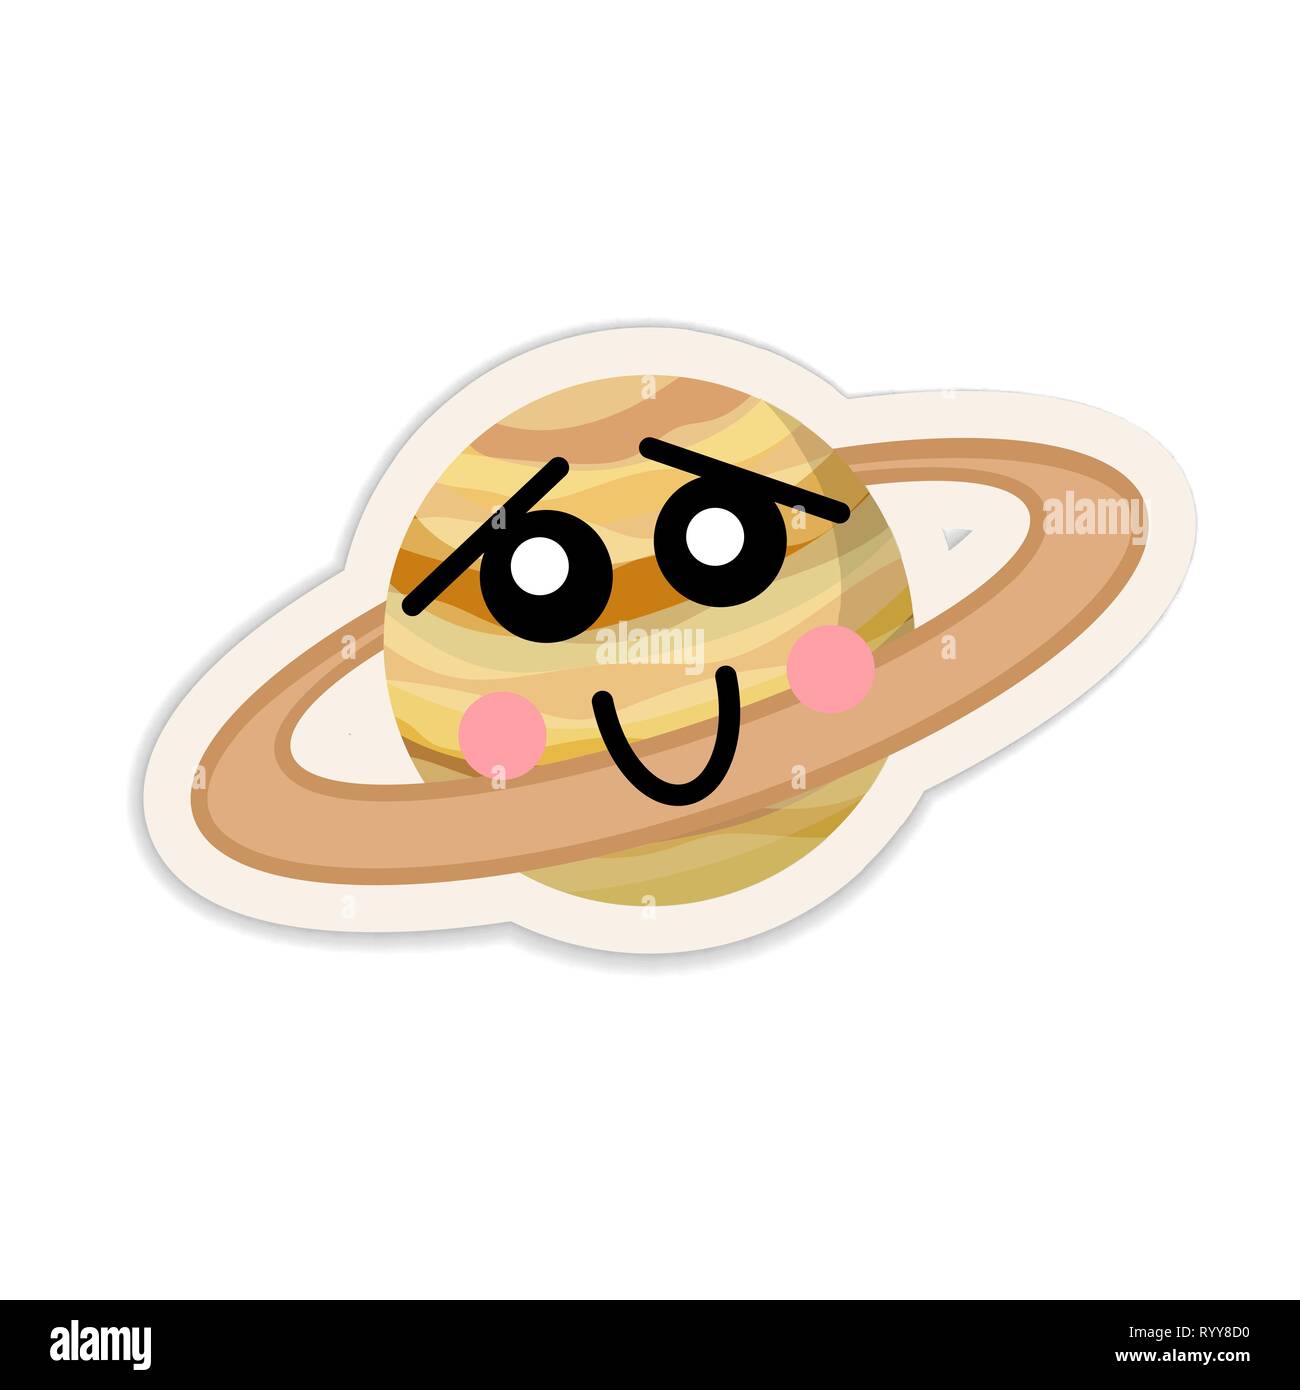 Cartoon saturn planet icon with cute face isolated on white Stock Vector